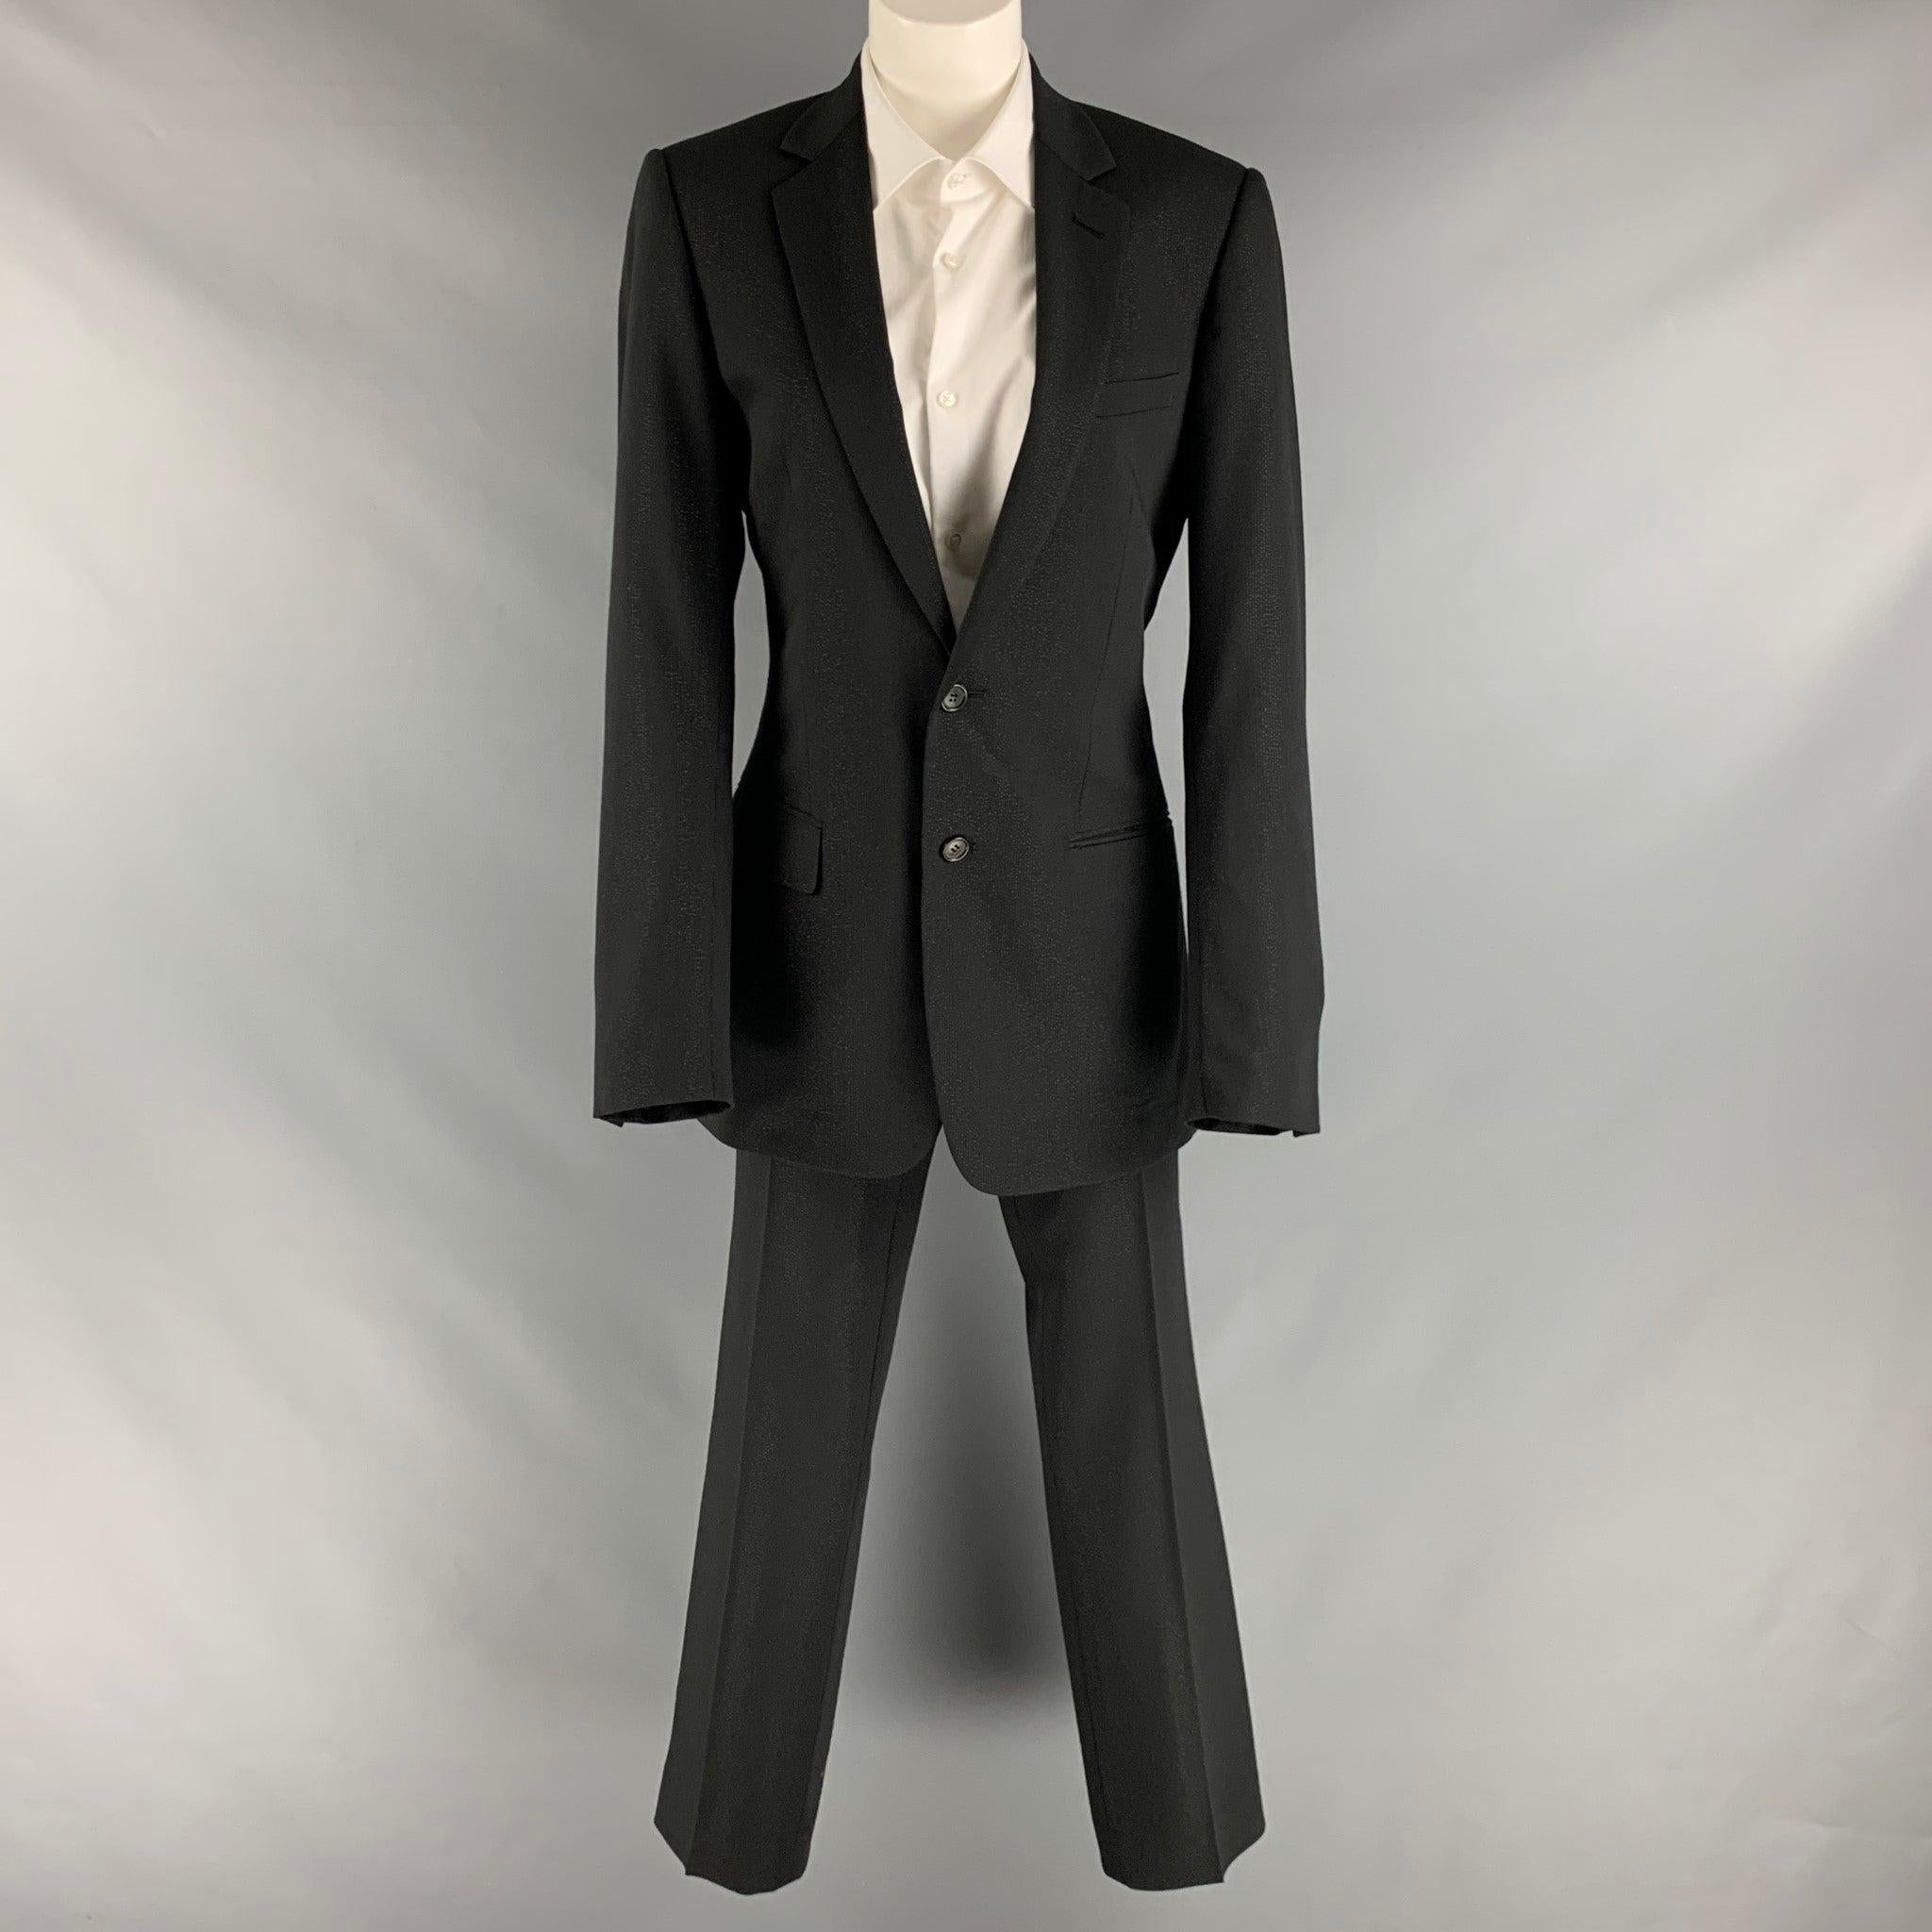 CHRISTIAN DIOR suit comes in a black polyester shimmery woven material with a full liner and includes a single breasted, double button sport coat with a notch lapel and matching flat front trousers.Excellent Pre-Owned Condition. 

Marked:   46